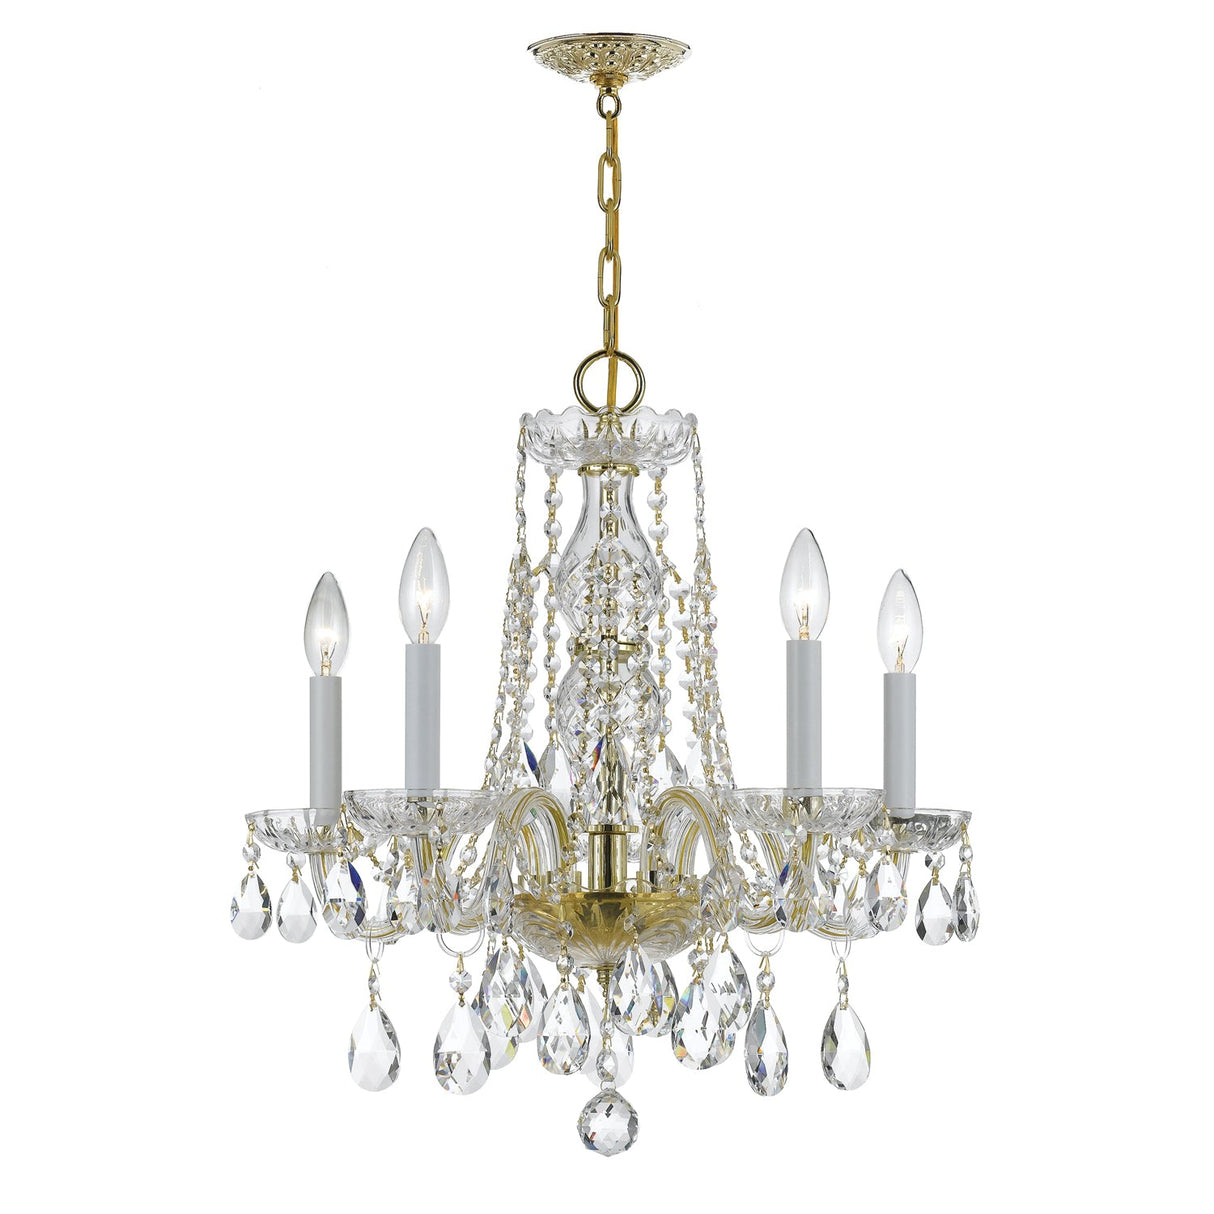 Traditional Crystal 5 Light Hand Cut Crystal Polished Brass Chandelier 1061-PB-CL-MWP